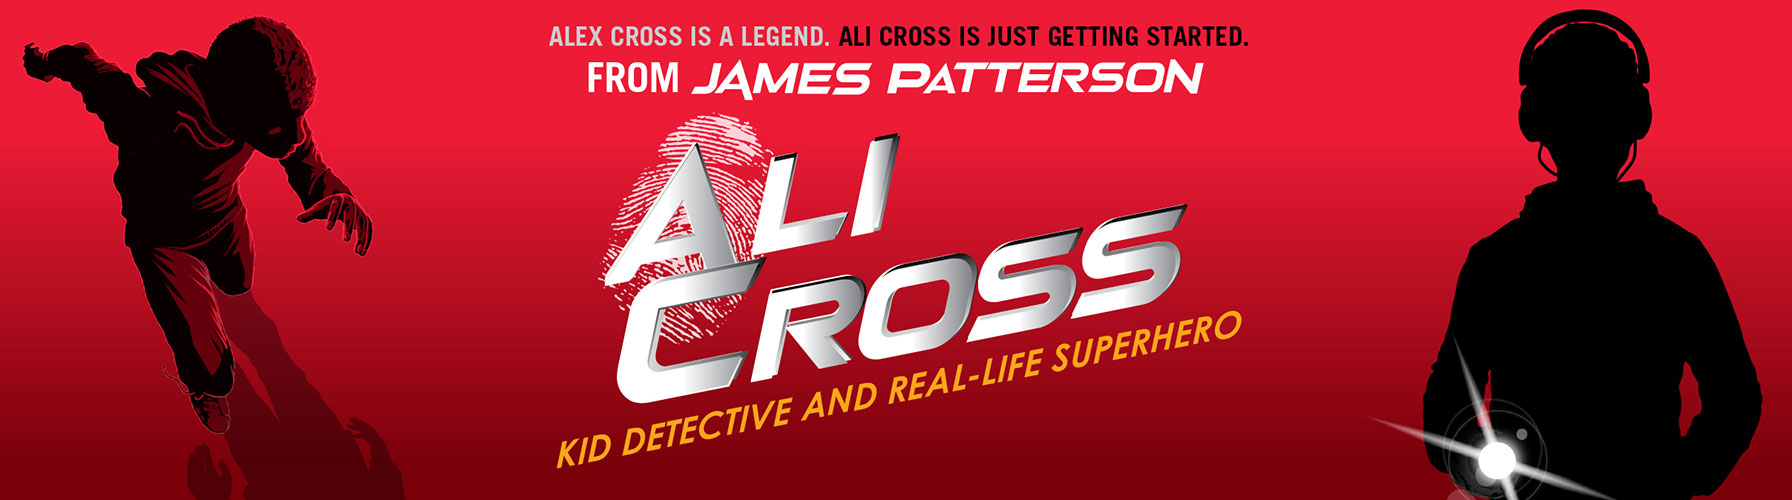 Alex Cross is a legend. Ali Cross is just getting started. From James Patterson, Ali Cross. Kid detective and real life superhero.